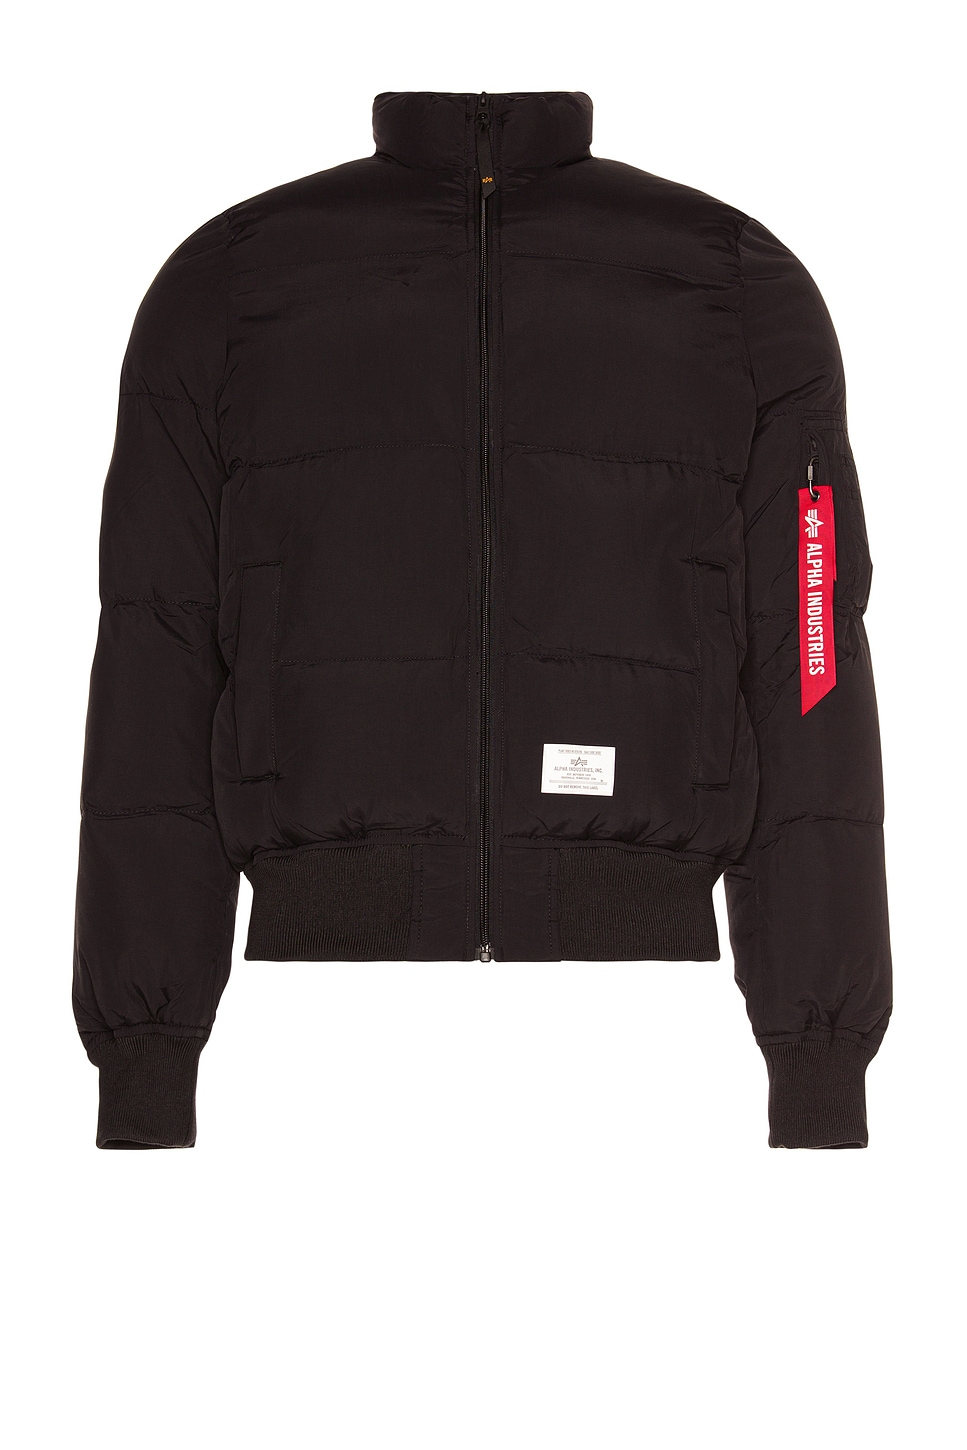 ALPHA INDUSTRIES MA-1 Quilted Flight Jacket in Black | FWRD